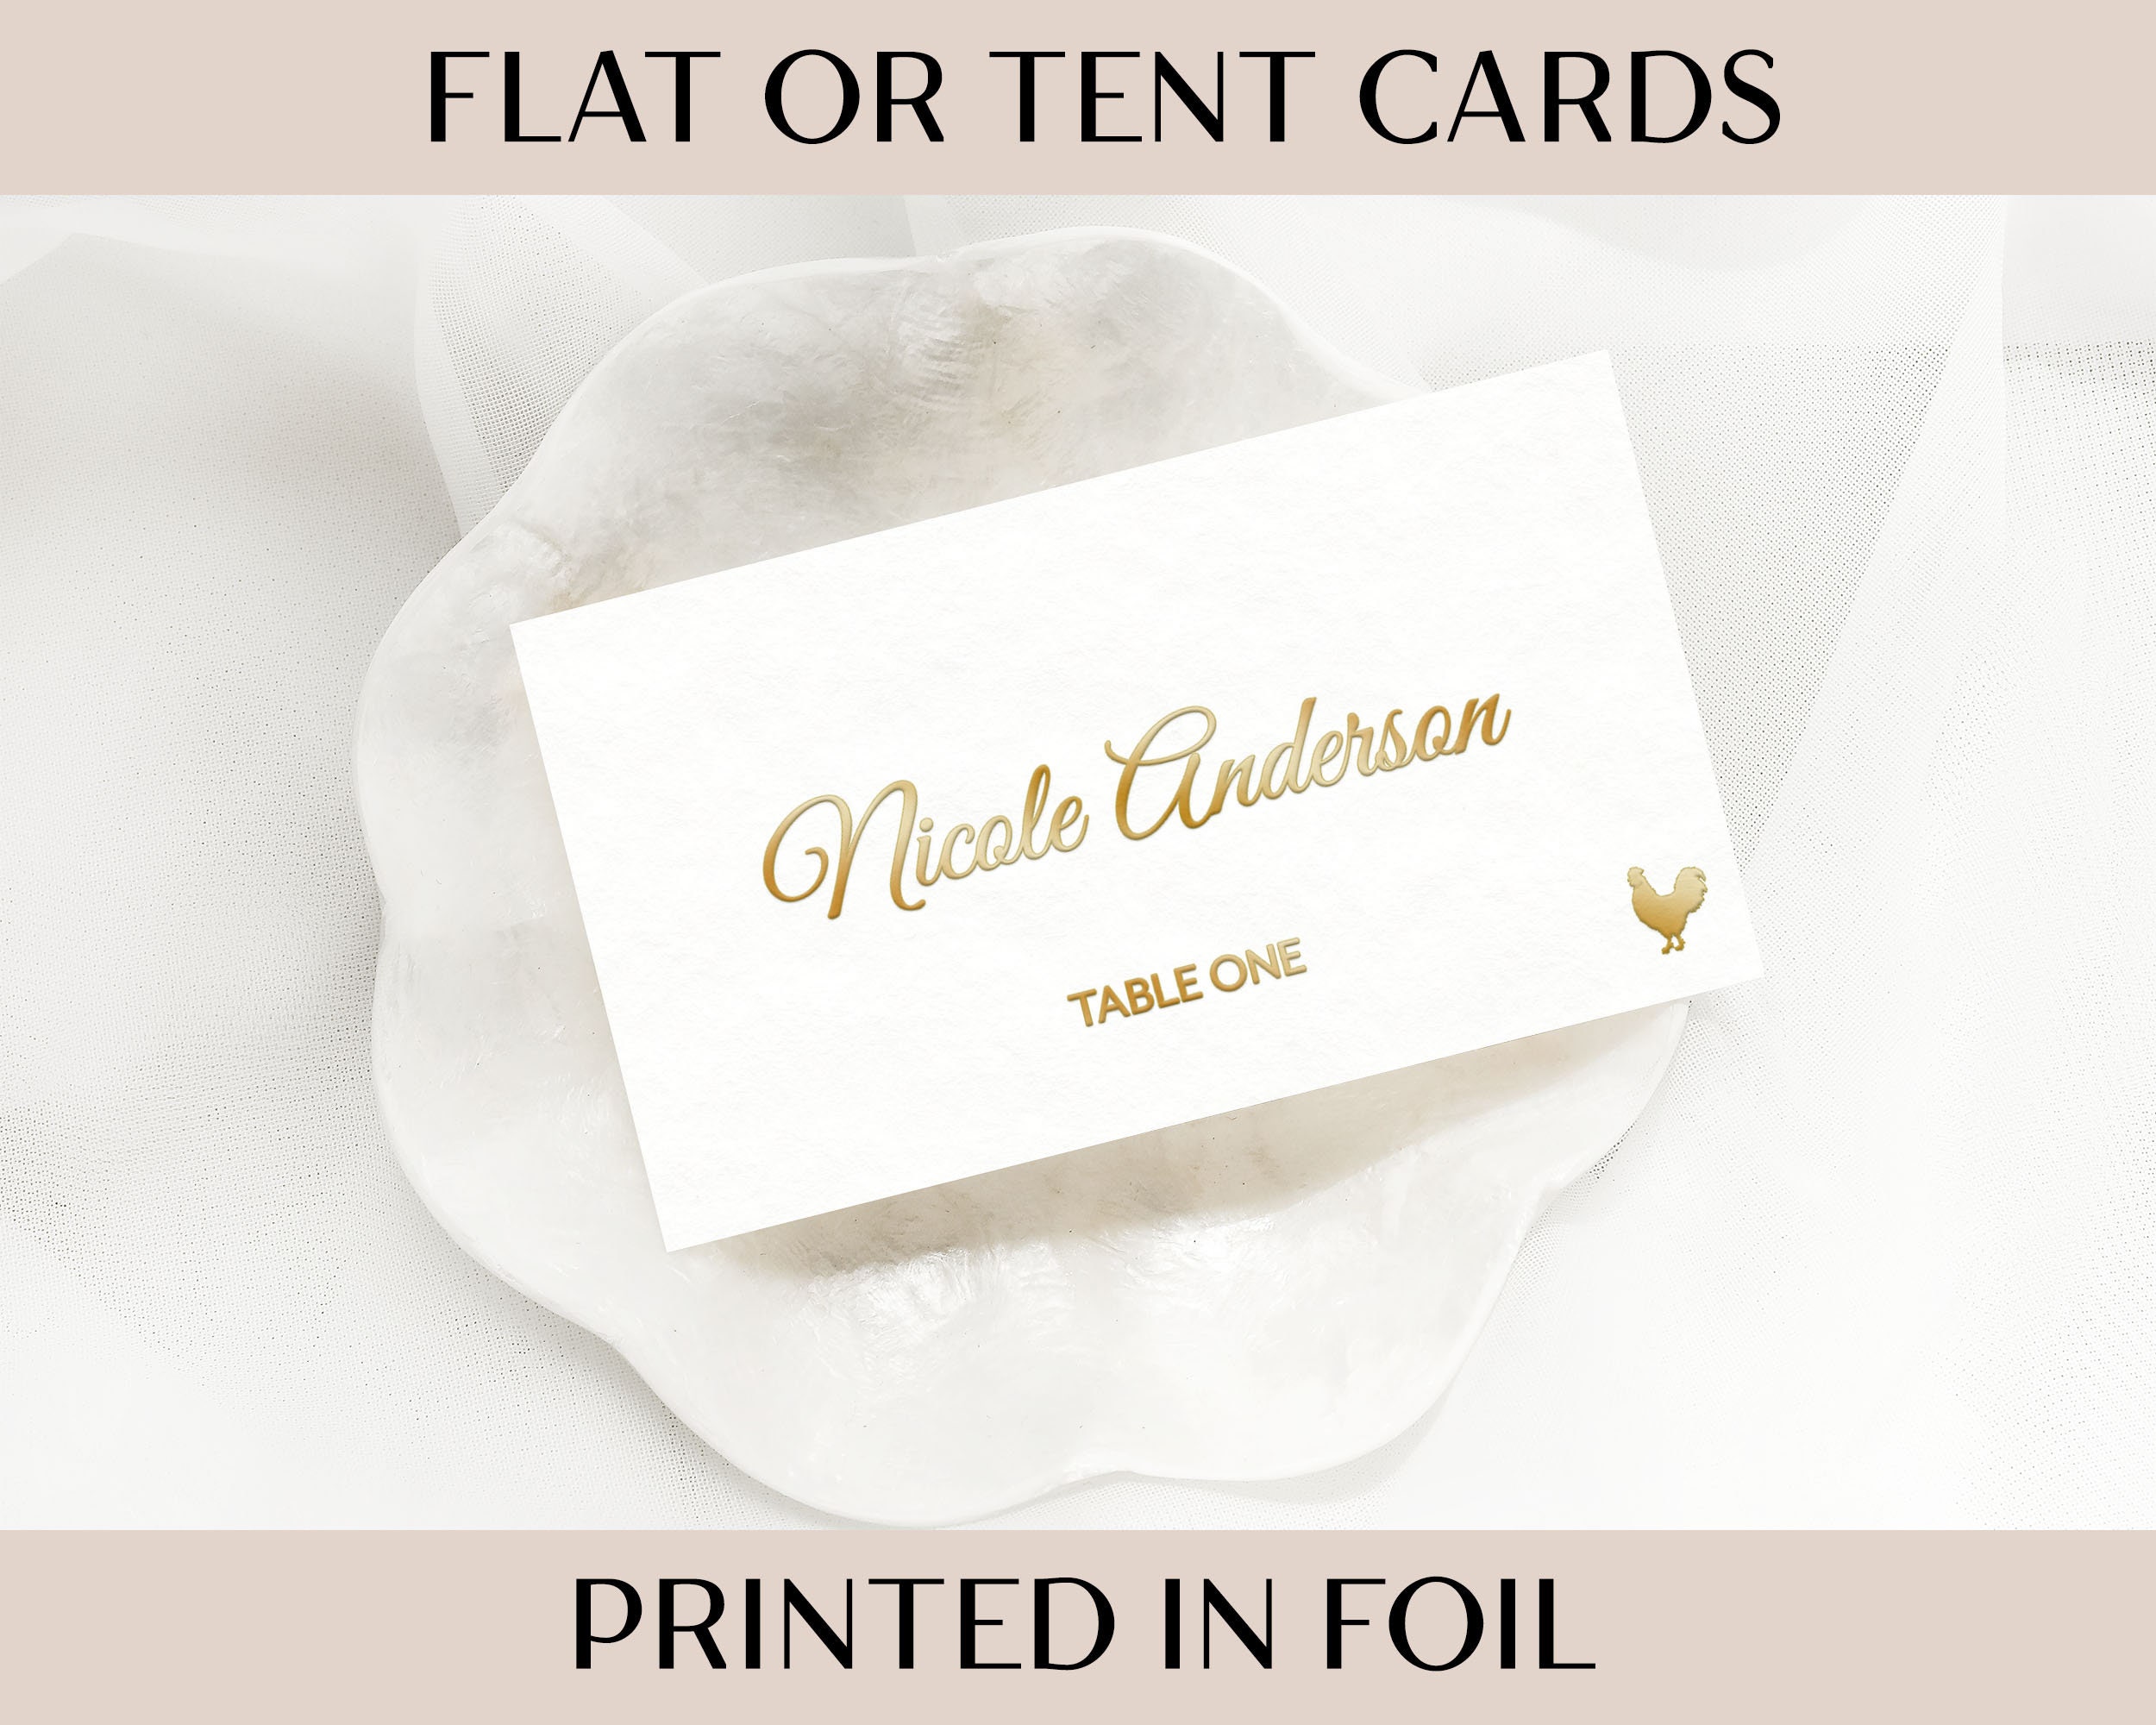 500 Custom Hot Foil Business Cards, Black Card Stock. Copper Foil, Gold  Foil, Silver Foil Calling Cards, Small Cards Stationery 